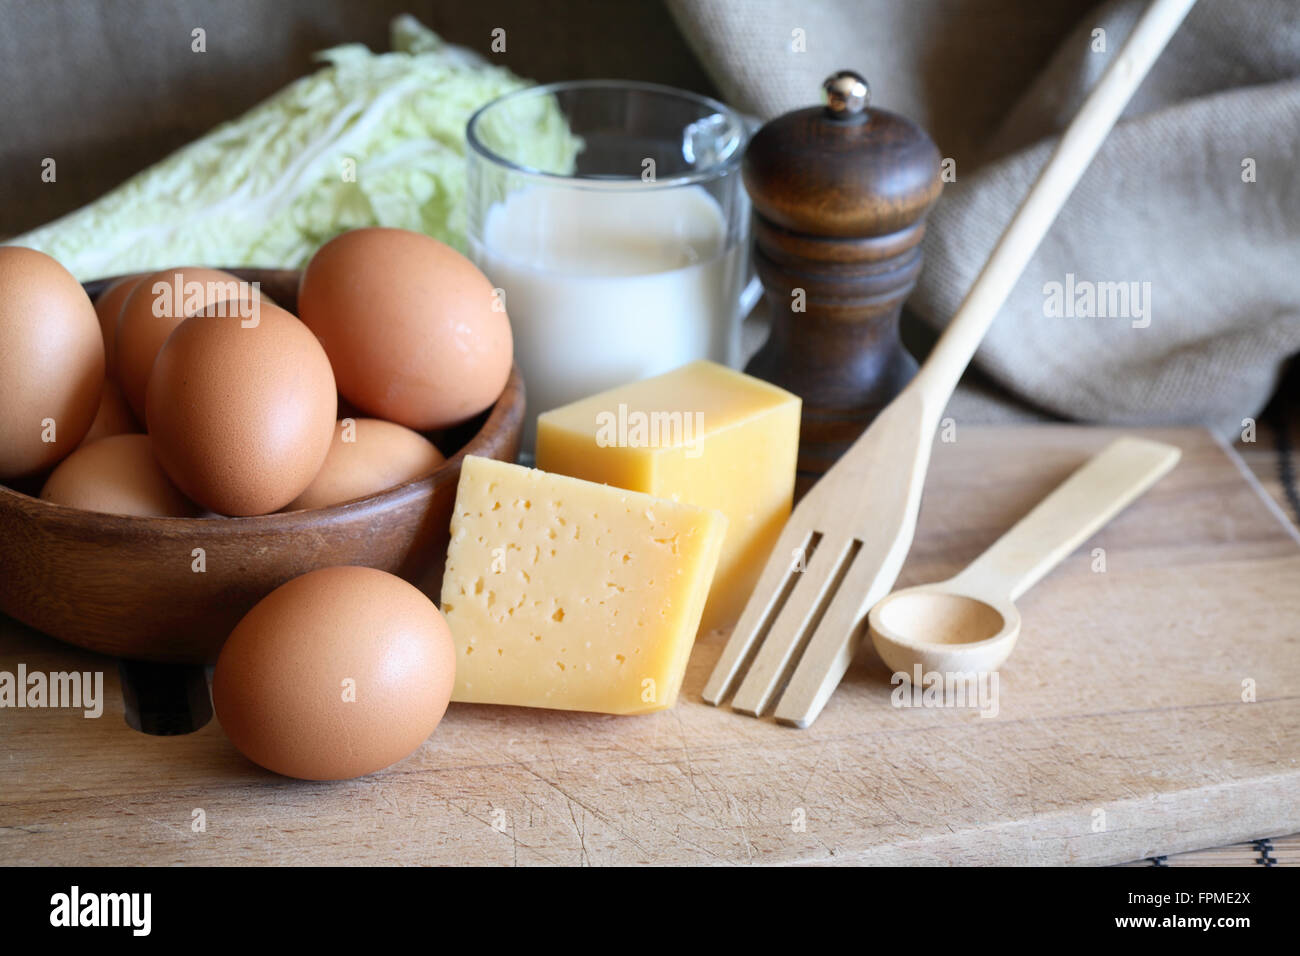 Bowl with raw eggs near cheese on wooden cutting board Stock Photo